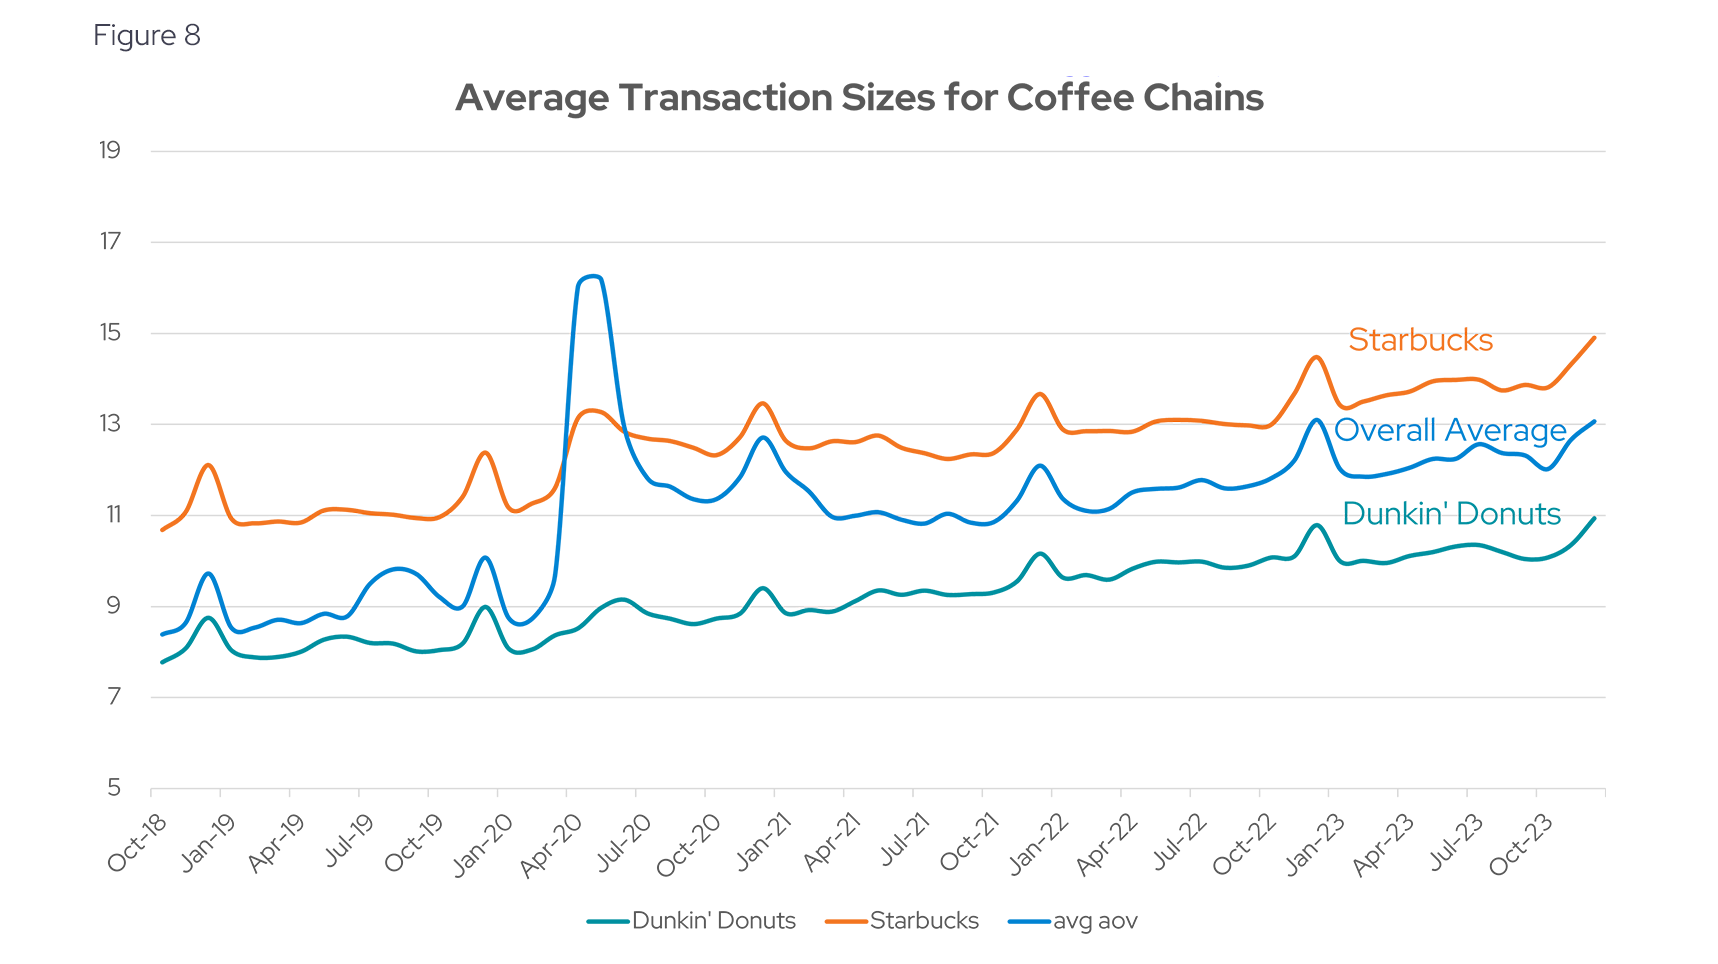 Average Transaction Sizes for Coffee Chains